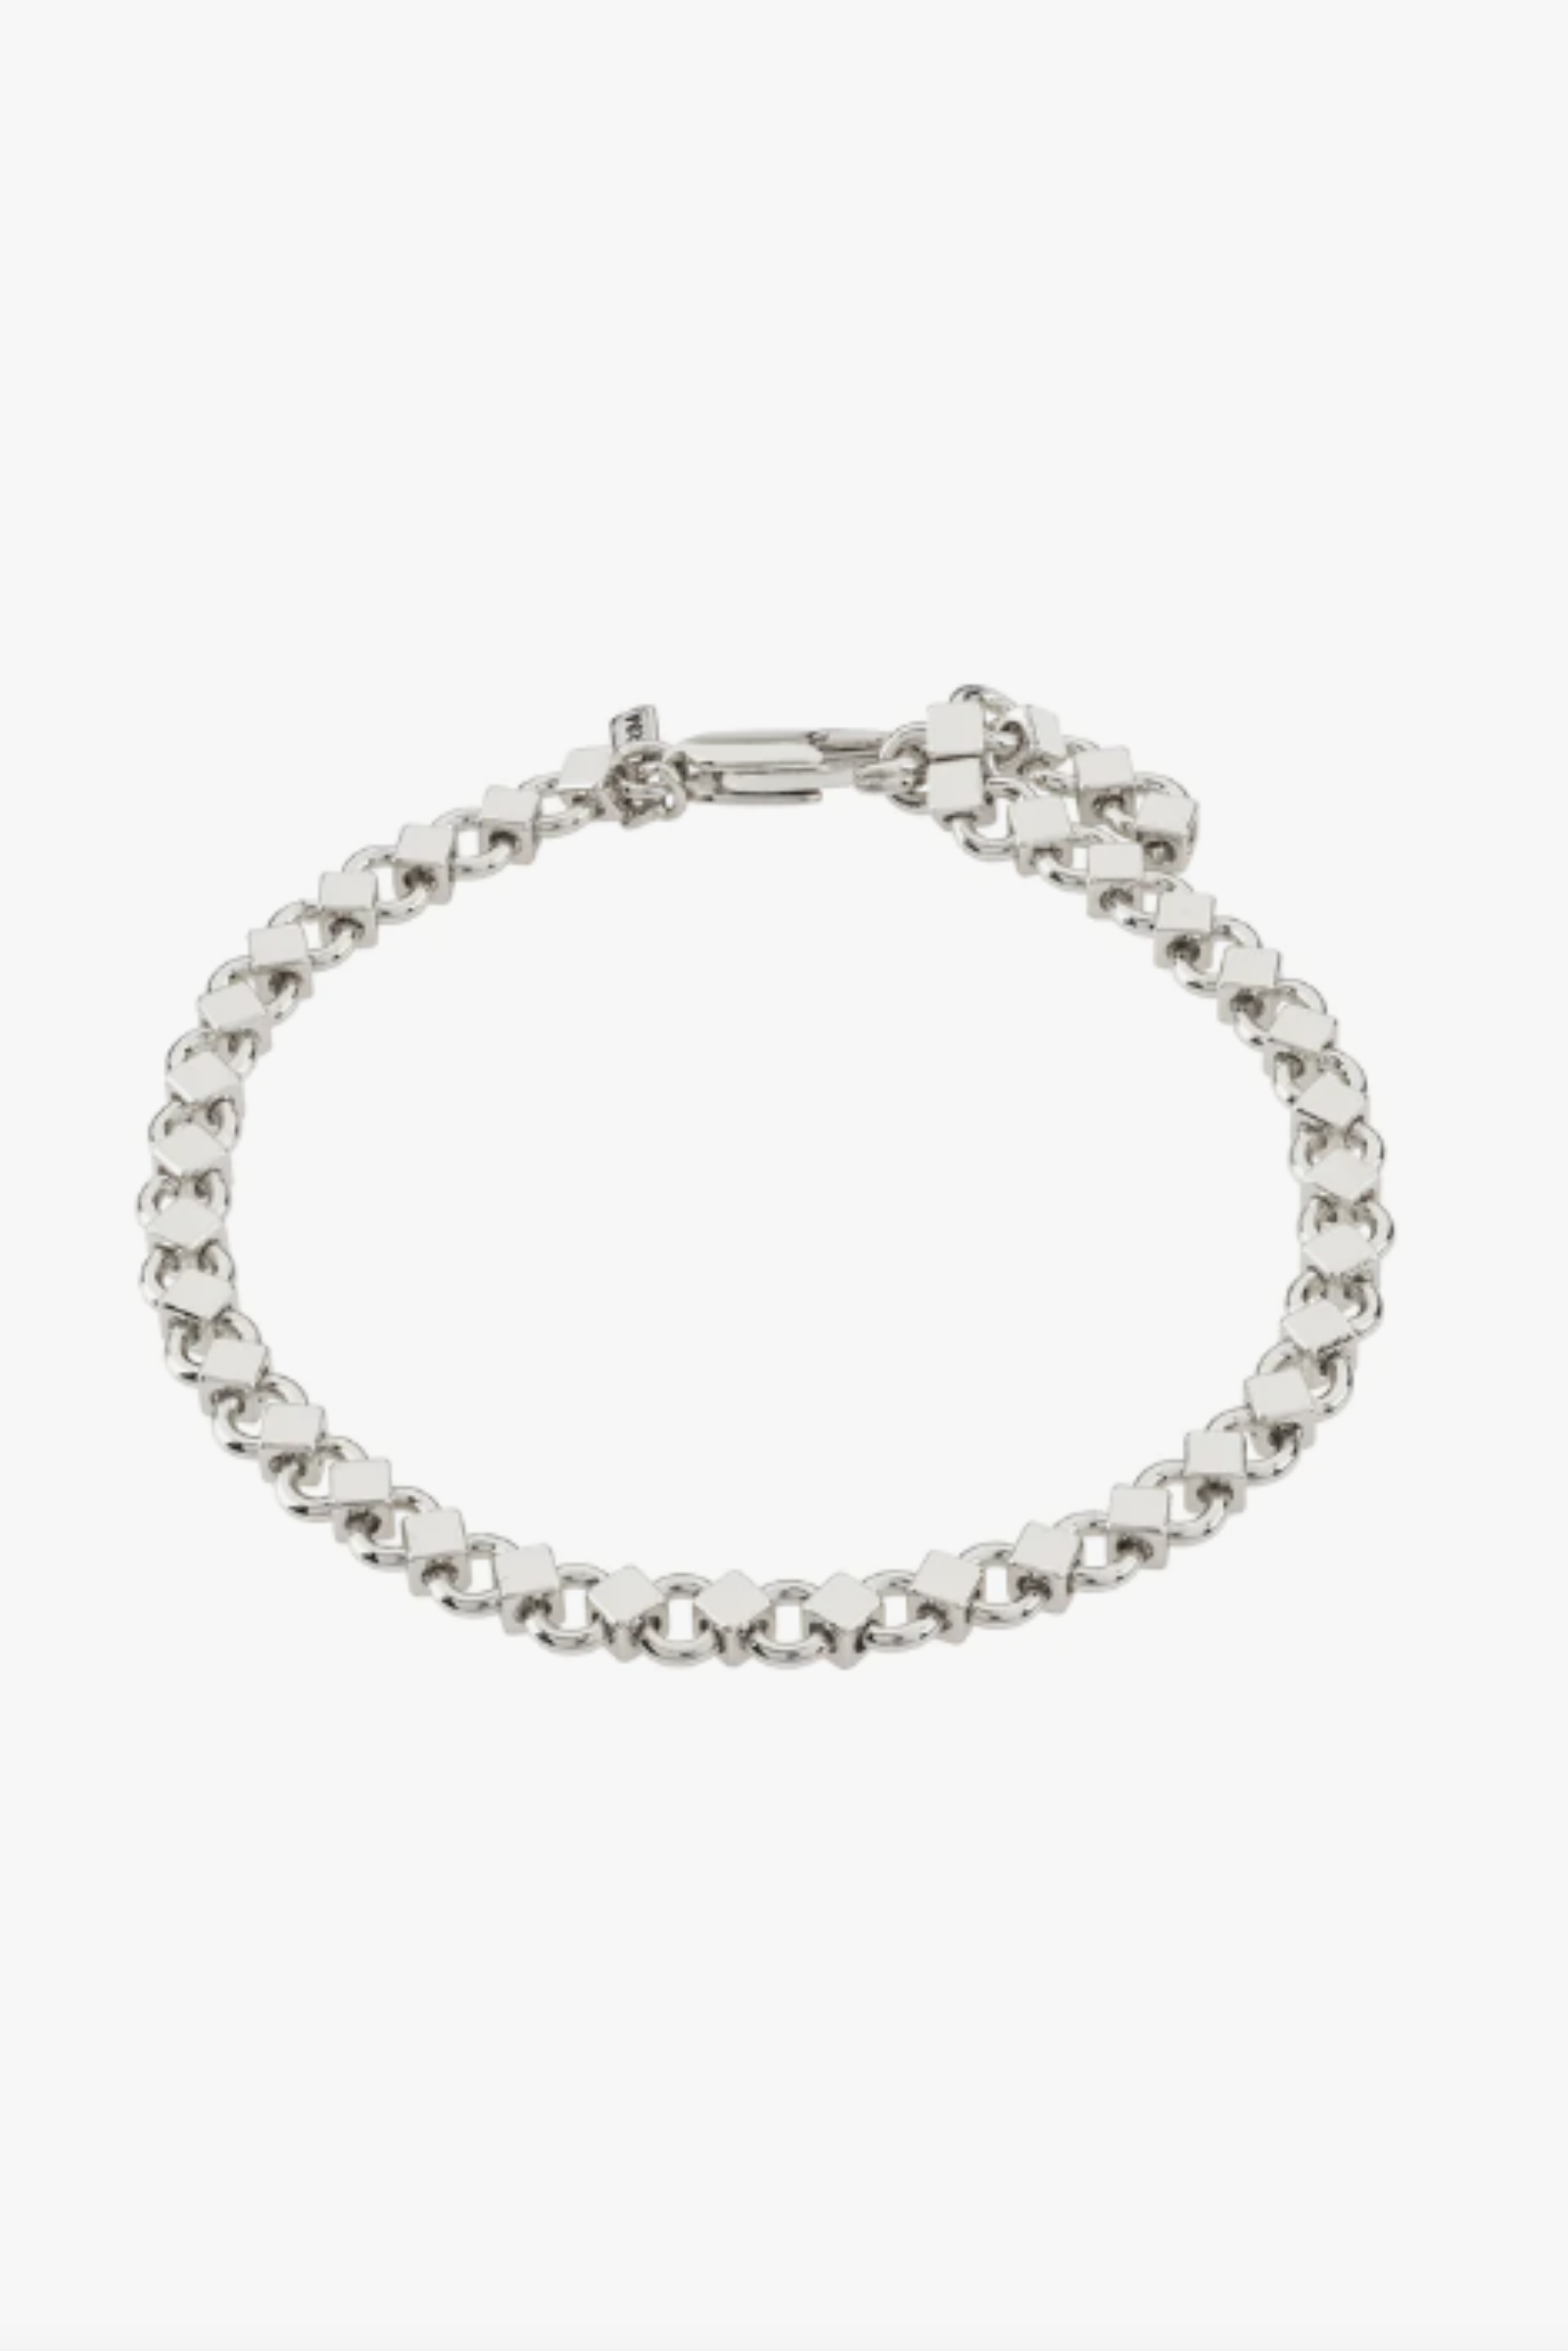 Desiree Recycled Bracelet - Silver Plated